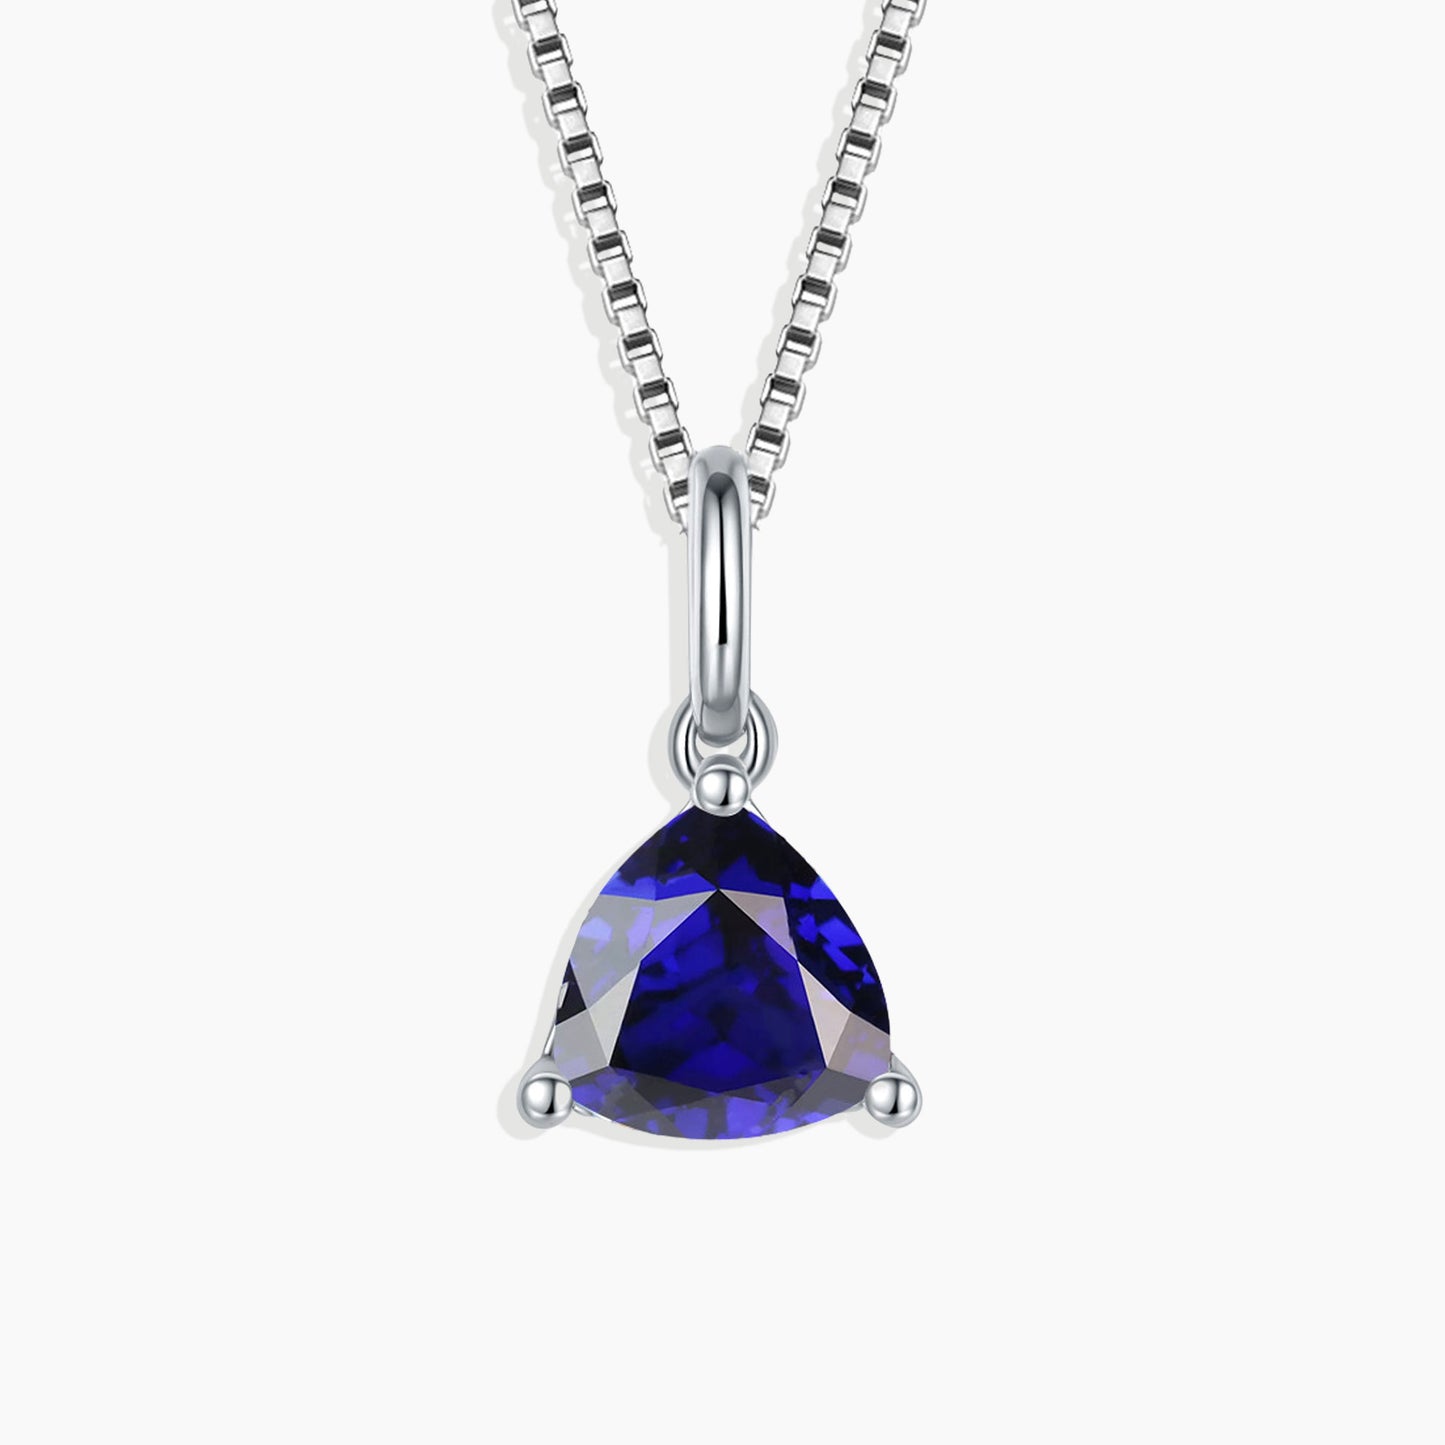 Irosk Tri Necklace in Sterling Silver -  Sapphire